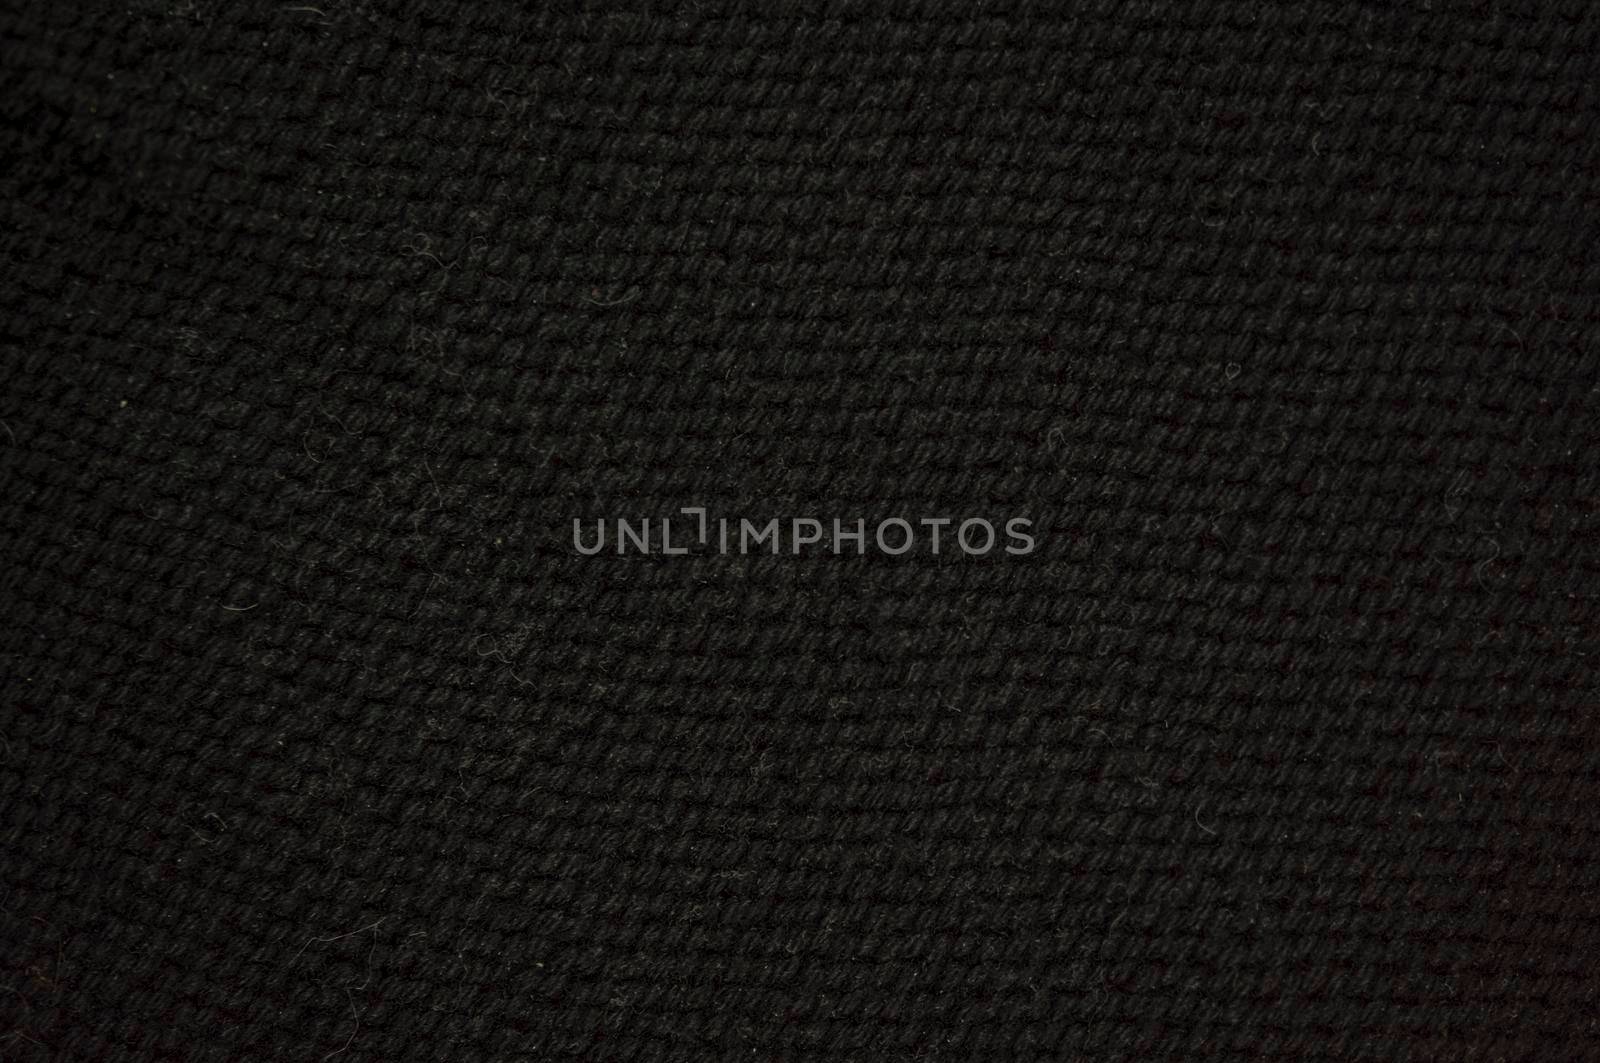 It is knitting wool texture for pattern and background.